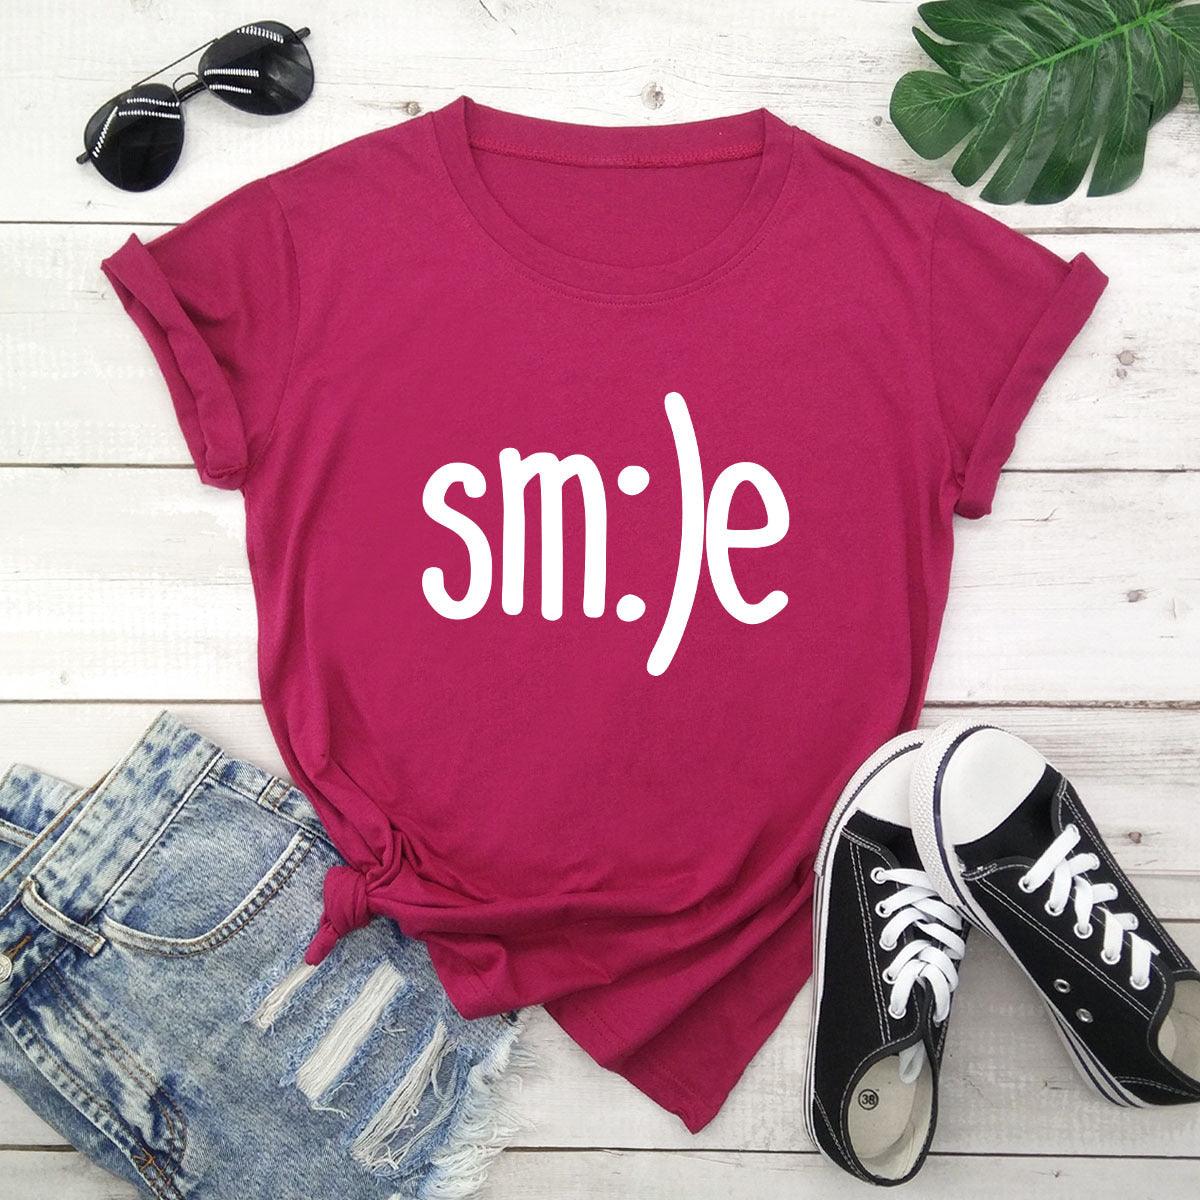 S-5XL Plus Size TShirt Women New Smile Letter Printed Shirt O Neck Short Sleeve Tees Summer Top 100%cotton Women's T-shirts